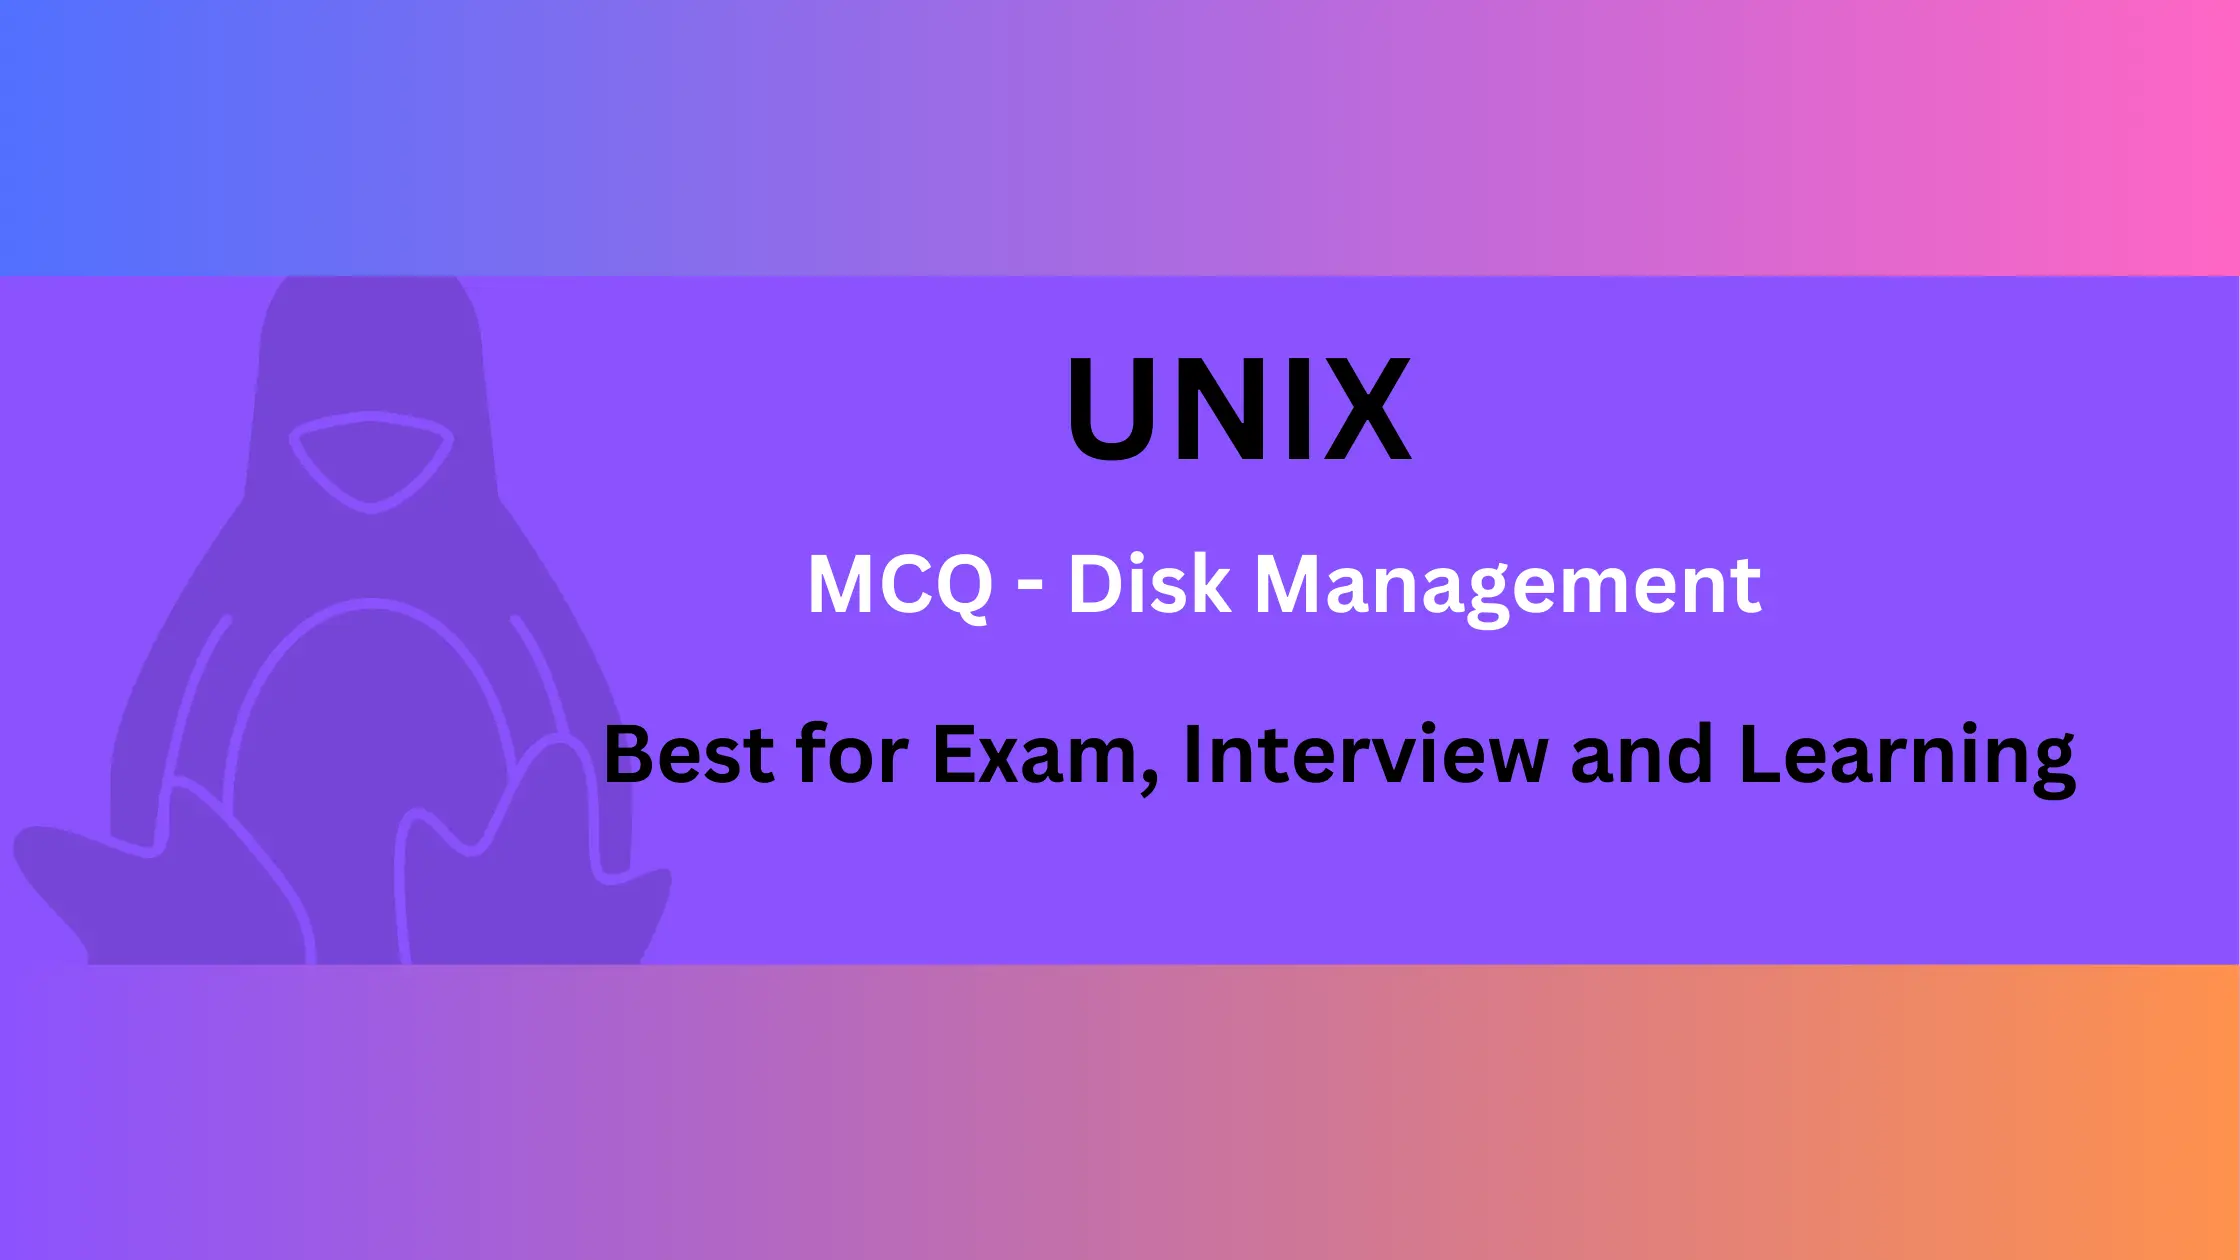 UNIX MCQ questions and answers for Disk Management